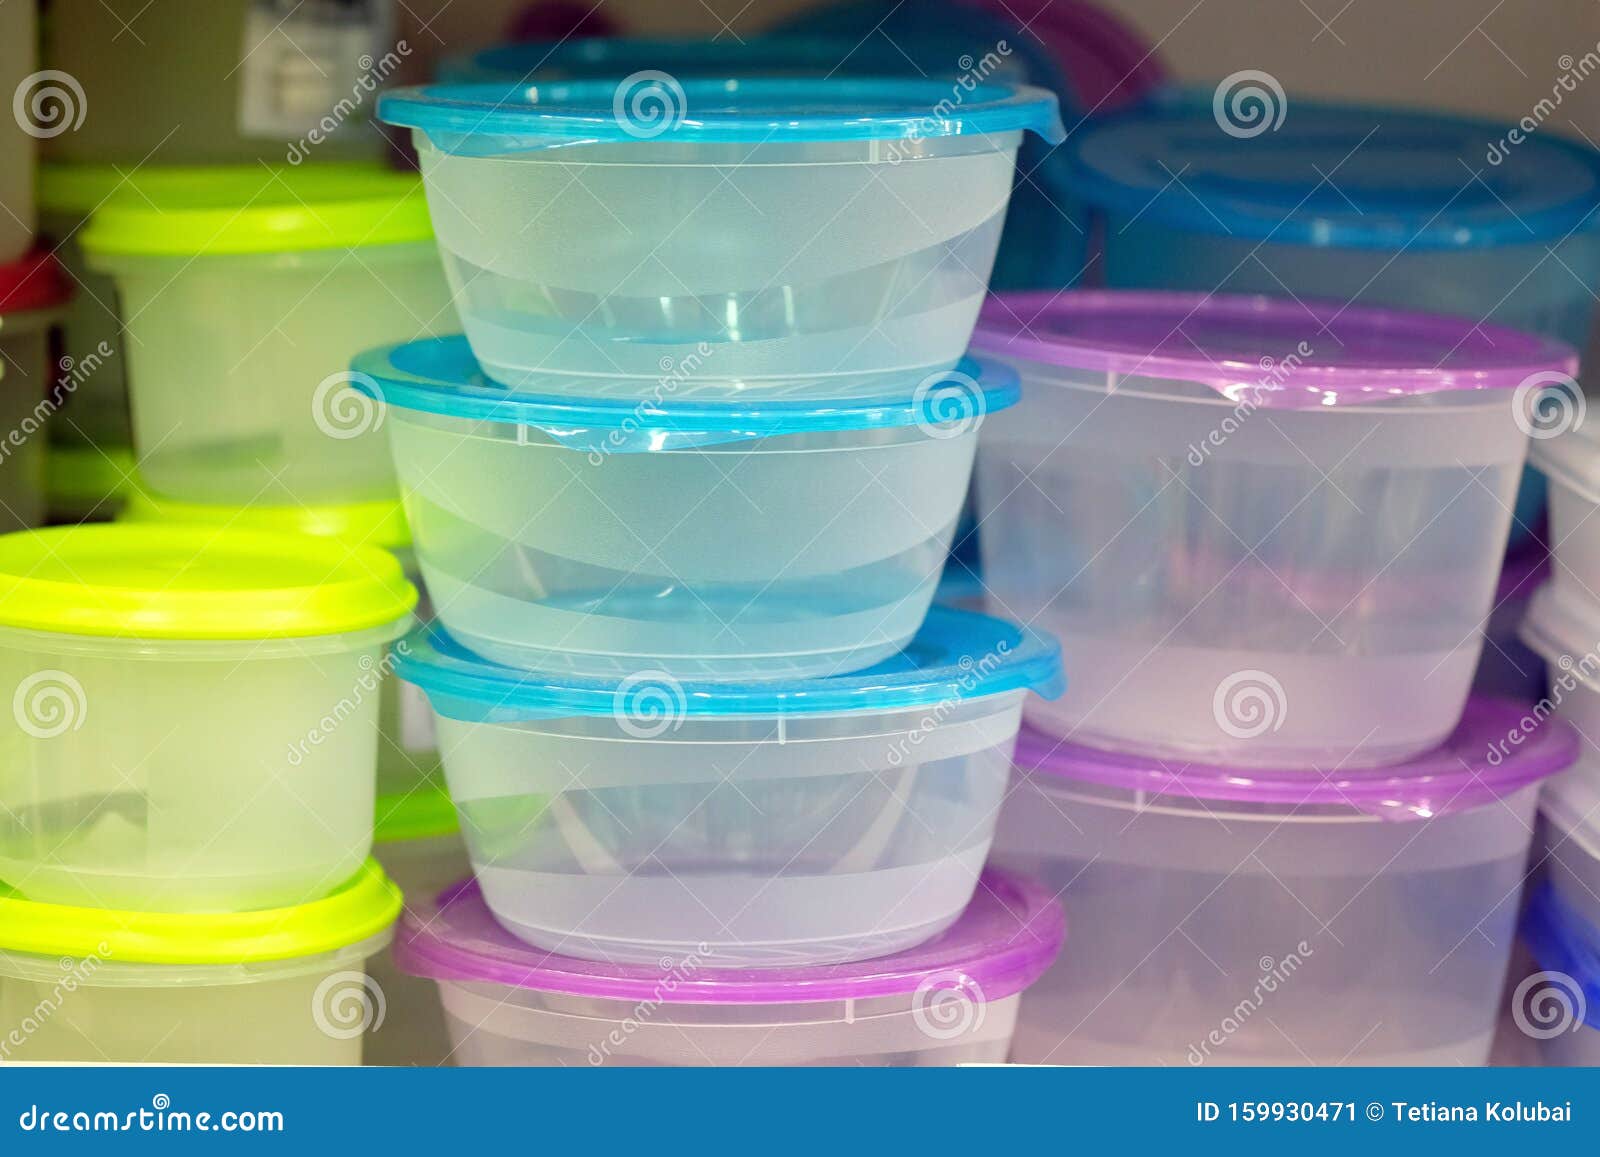 Plastic Kitchen Trays On The Shelf Of The Kitchen Cabinet Stock